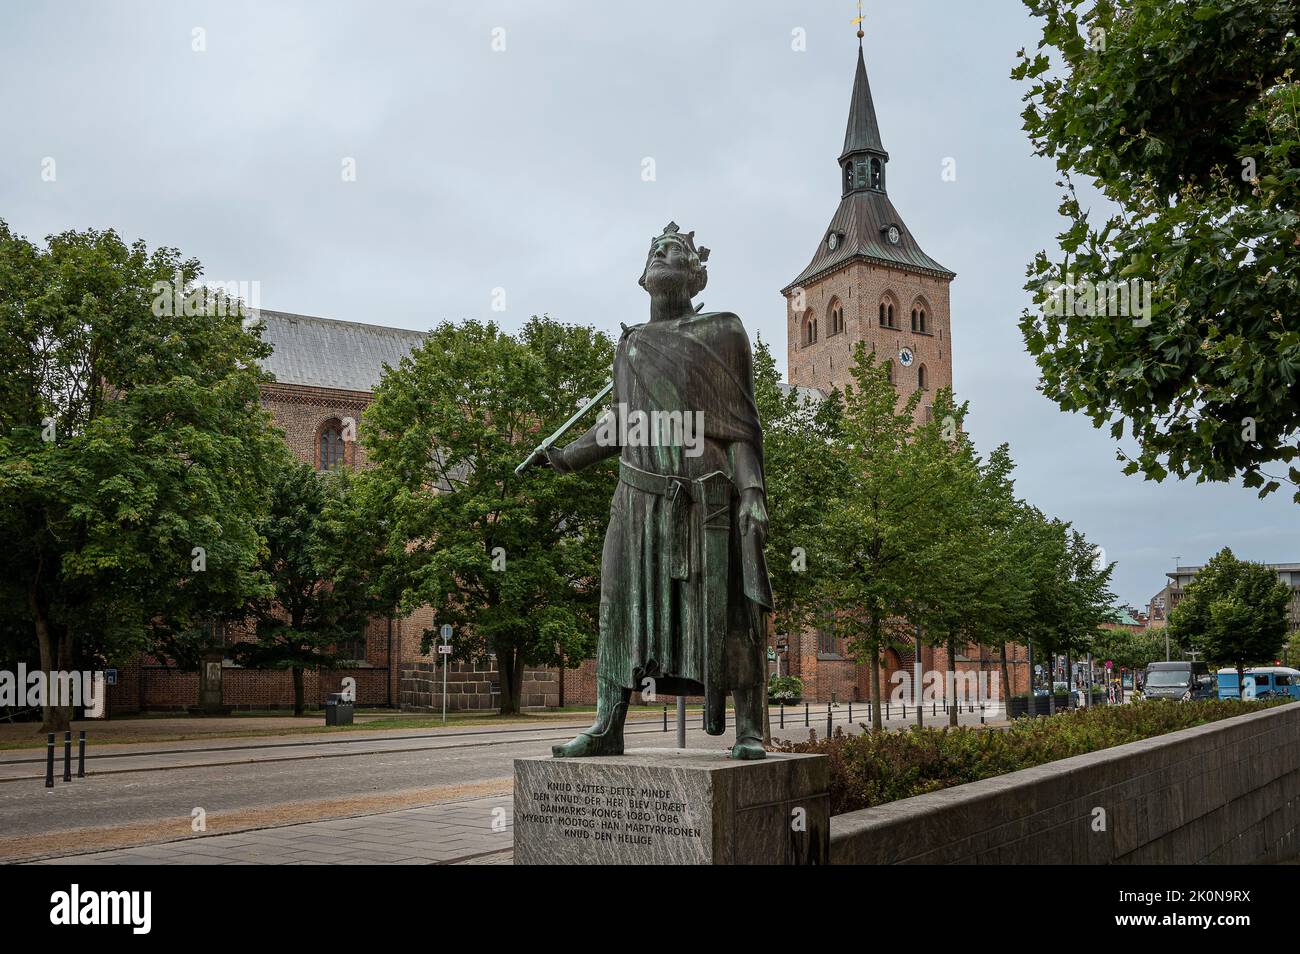 bronze statue of Saint Canute in front of his church in Odense, Denmark, August 27, 2022 Stock Photo